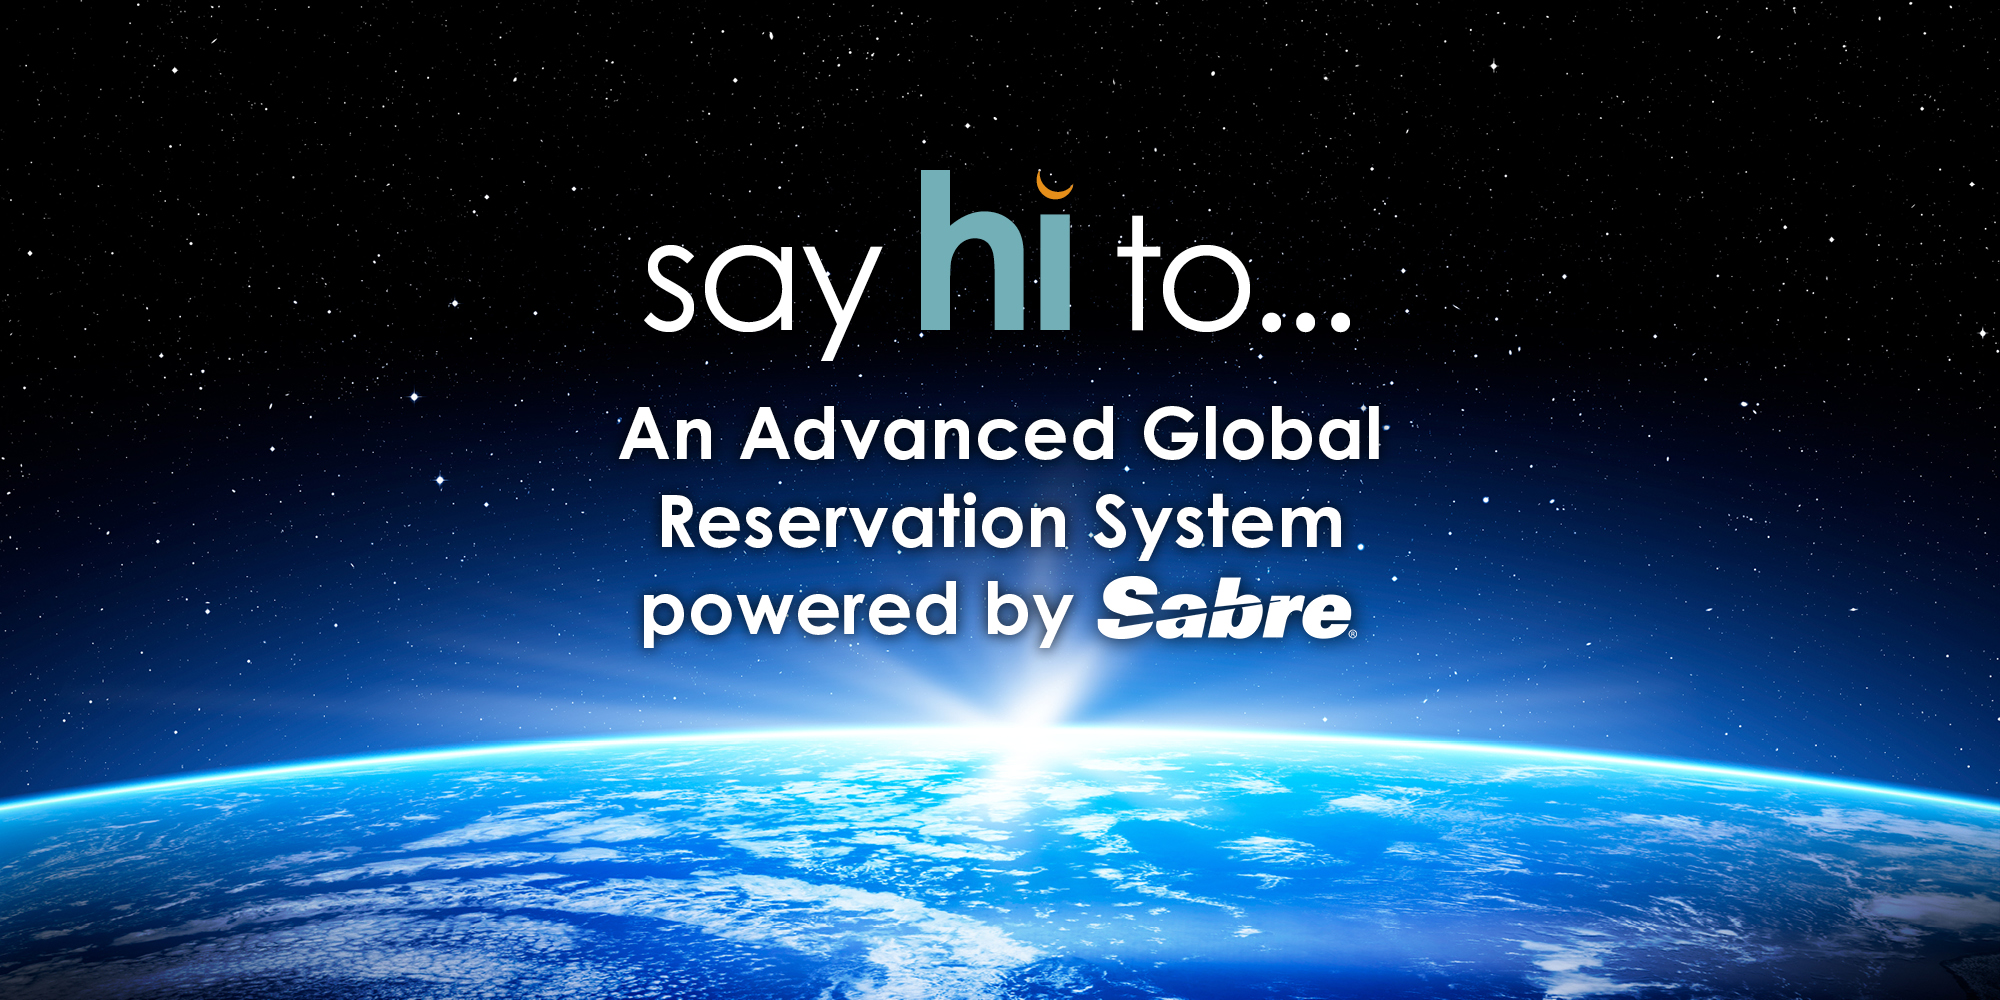 Reservation System powered by Sabre